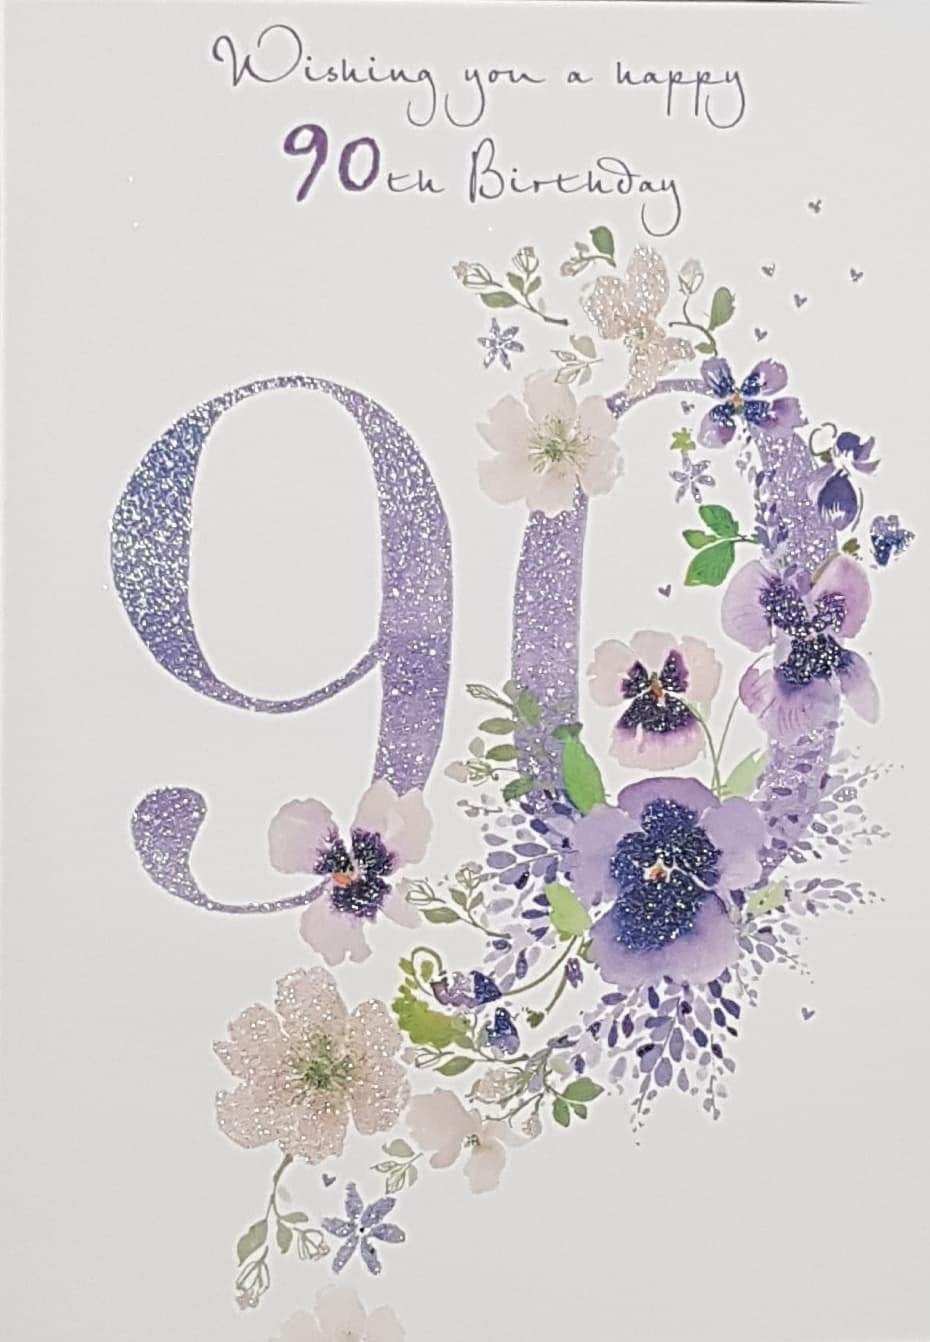 Age 90  Birthday Card - Big Purple Number '90' With Floral Decorations